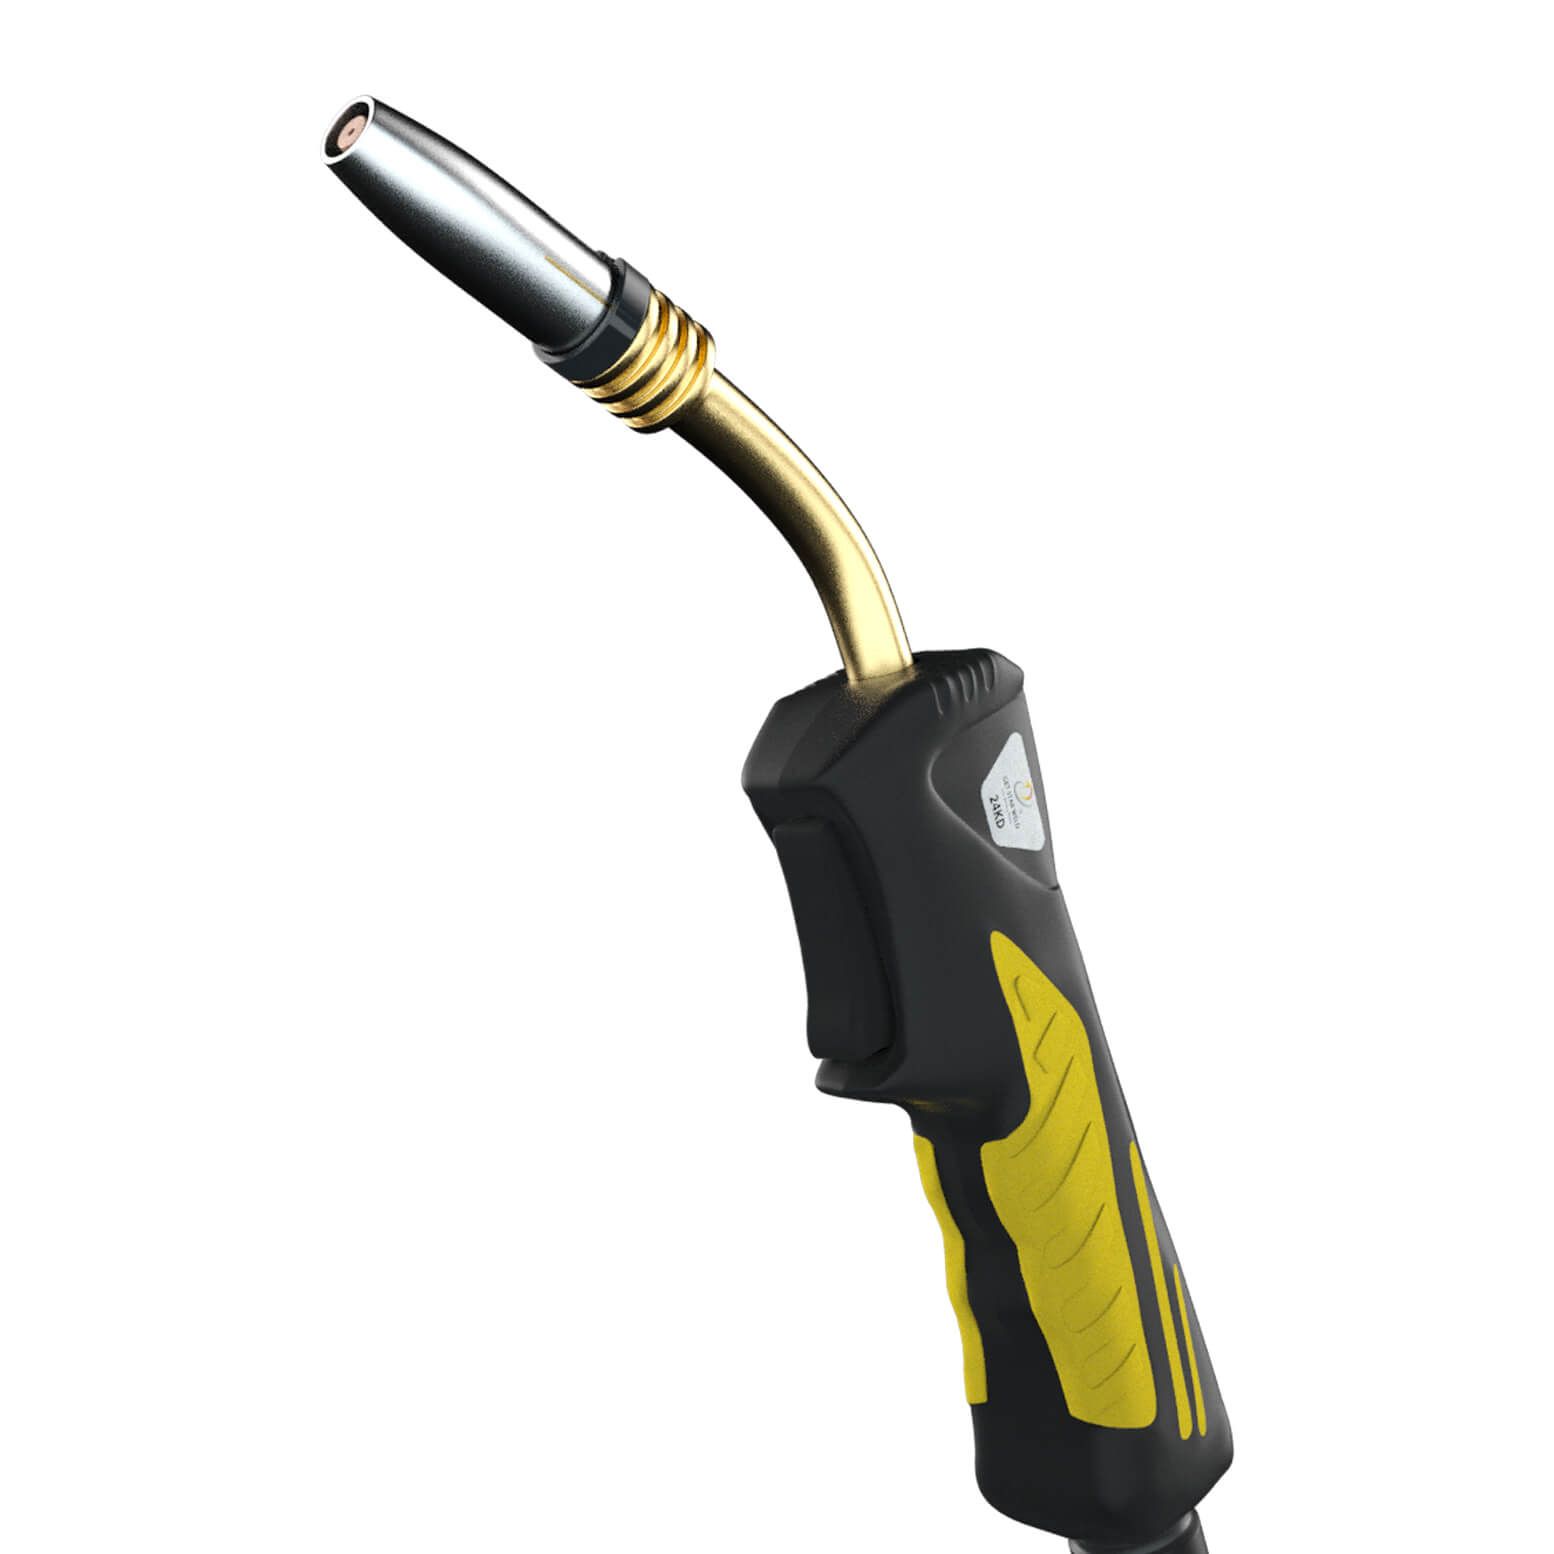 Get Star Weld EURO GSW-24KD Air Cooled MIG/MAG Welding Torch